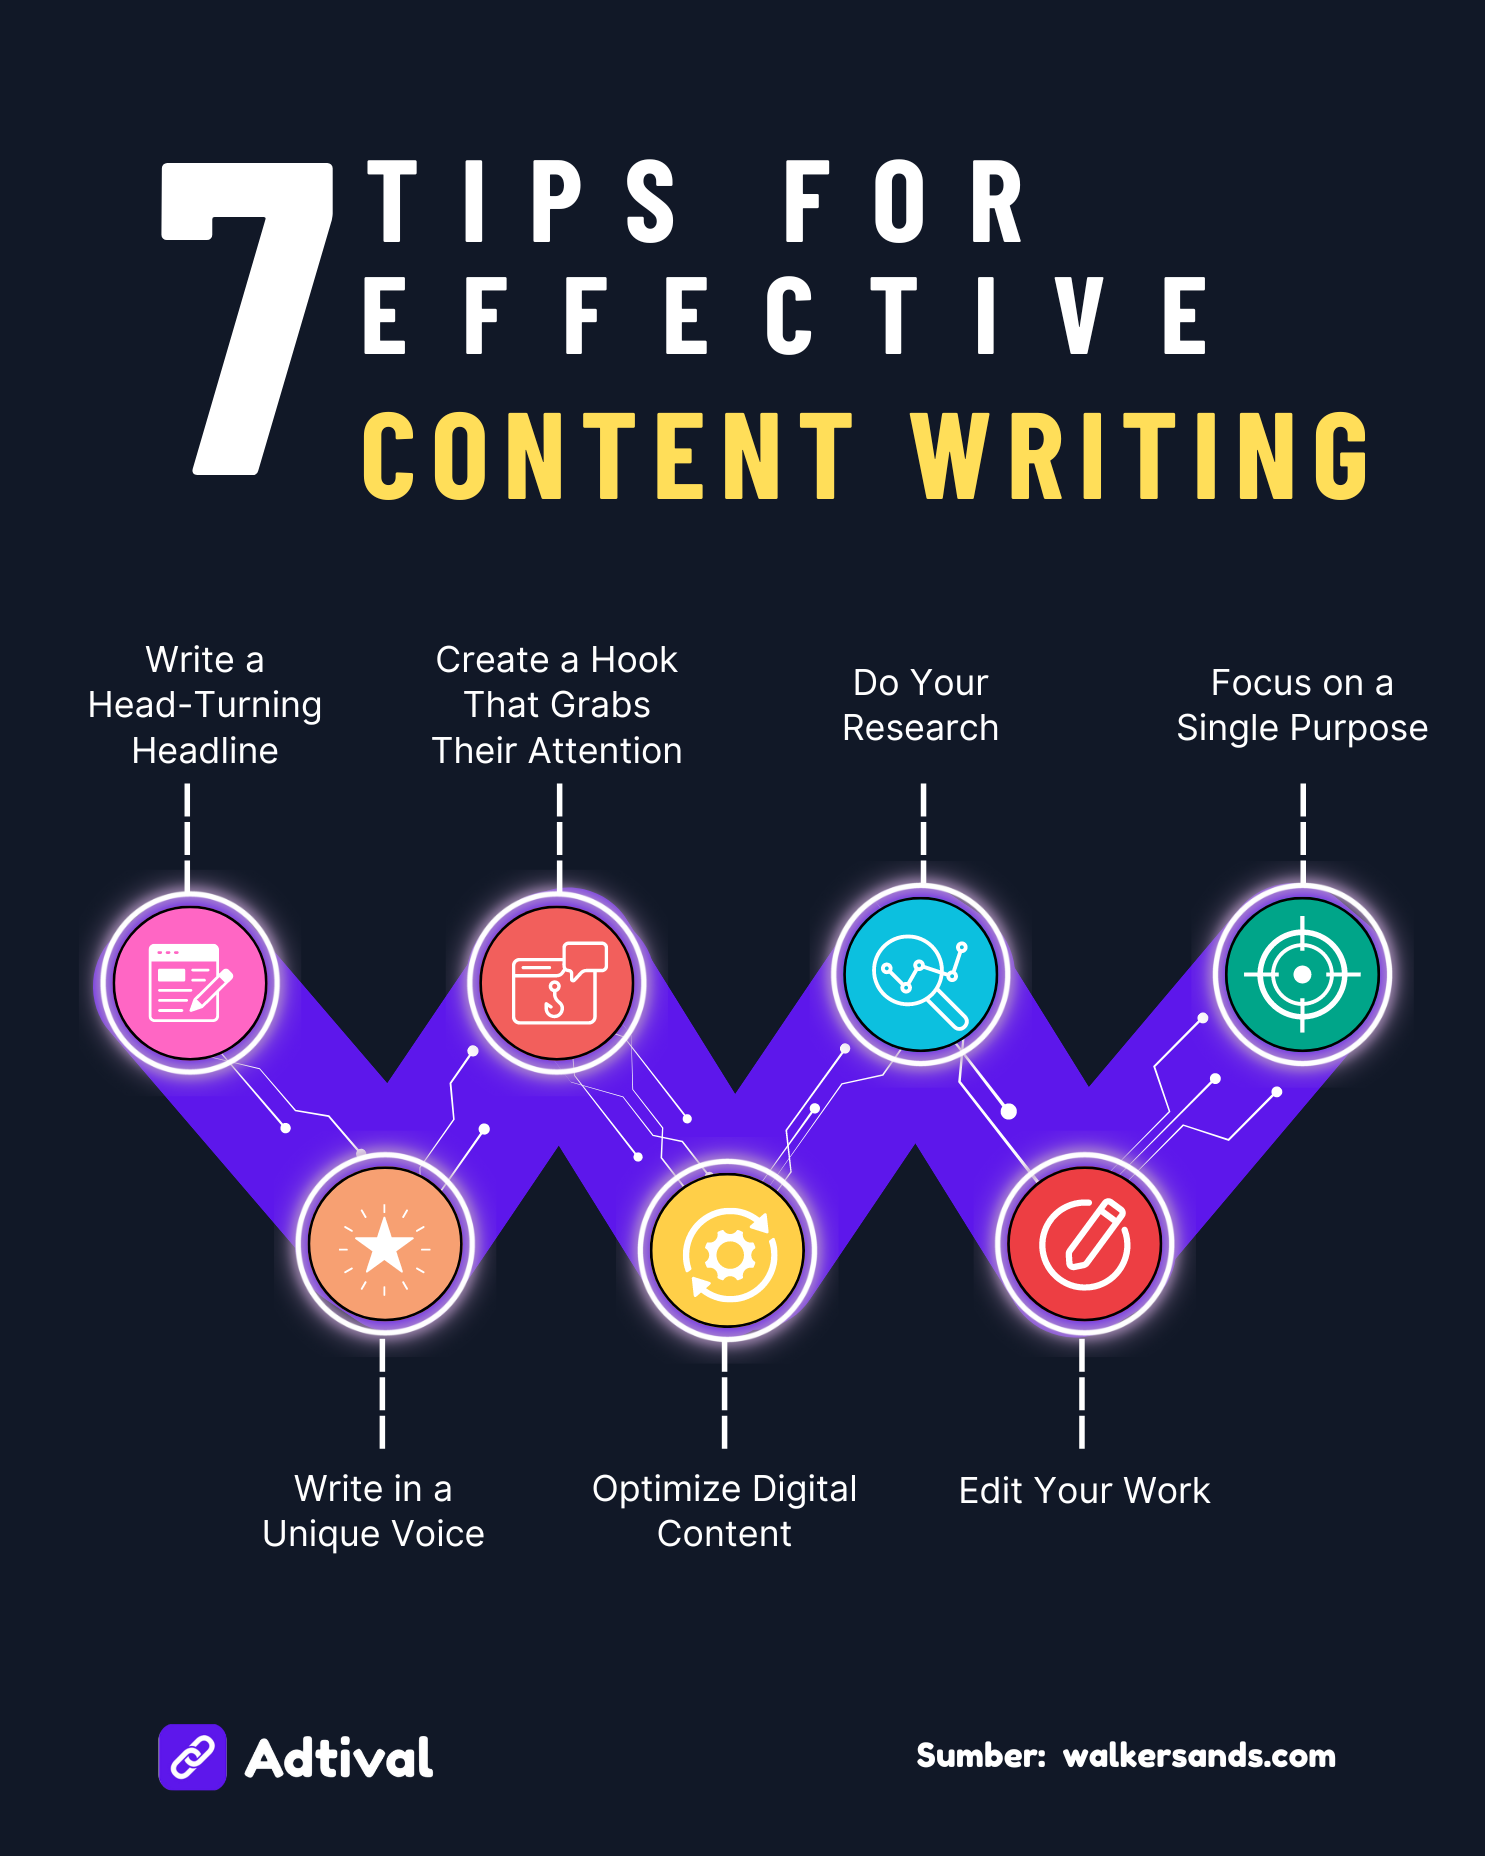 7 Easy Tips for Effective Content Writing